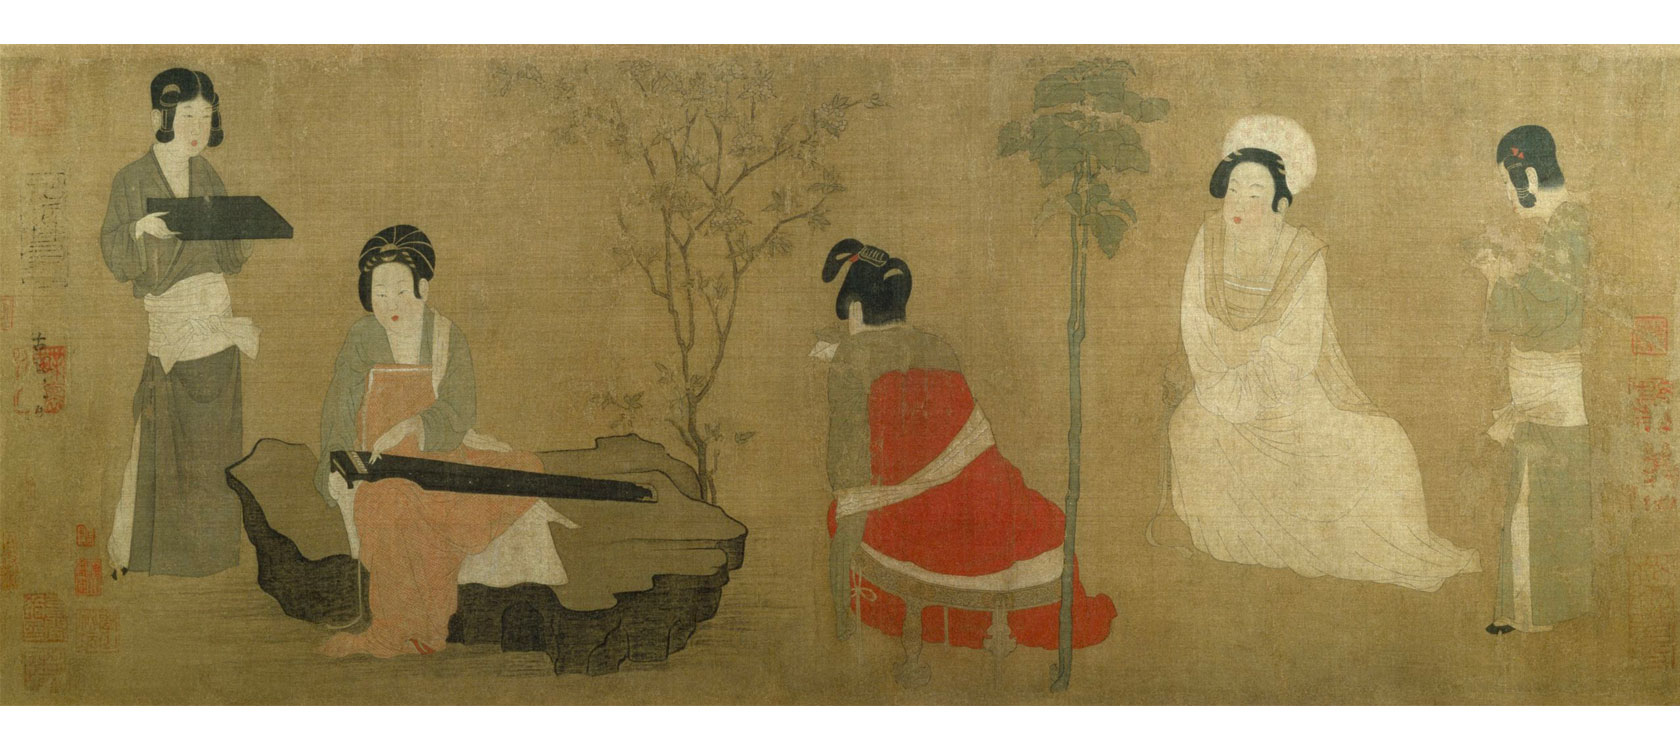 Zhou Fang, Chinese (730 - 800 C.E.). Palace Ladies Tuning the Lute, Song Dynasty (960-1279), 12th century. Handscroll; ink and color on silk, 11 x 29 5/8 inches (28 x 75.3 cm). The Nelson-Atkins Museum of Art, Kansas City, Missouri. Purchase: William Rockhill Nelson Trust, 32-159/1.